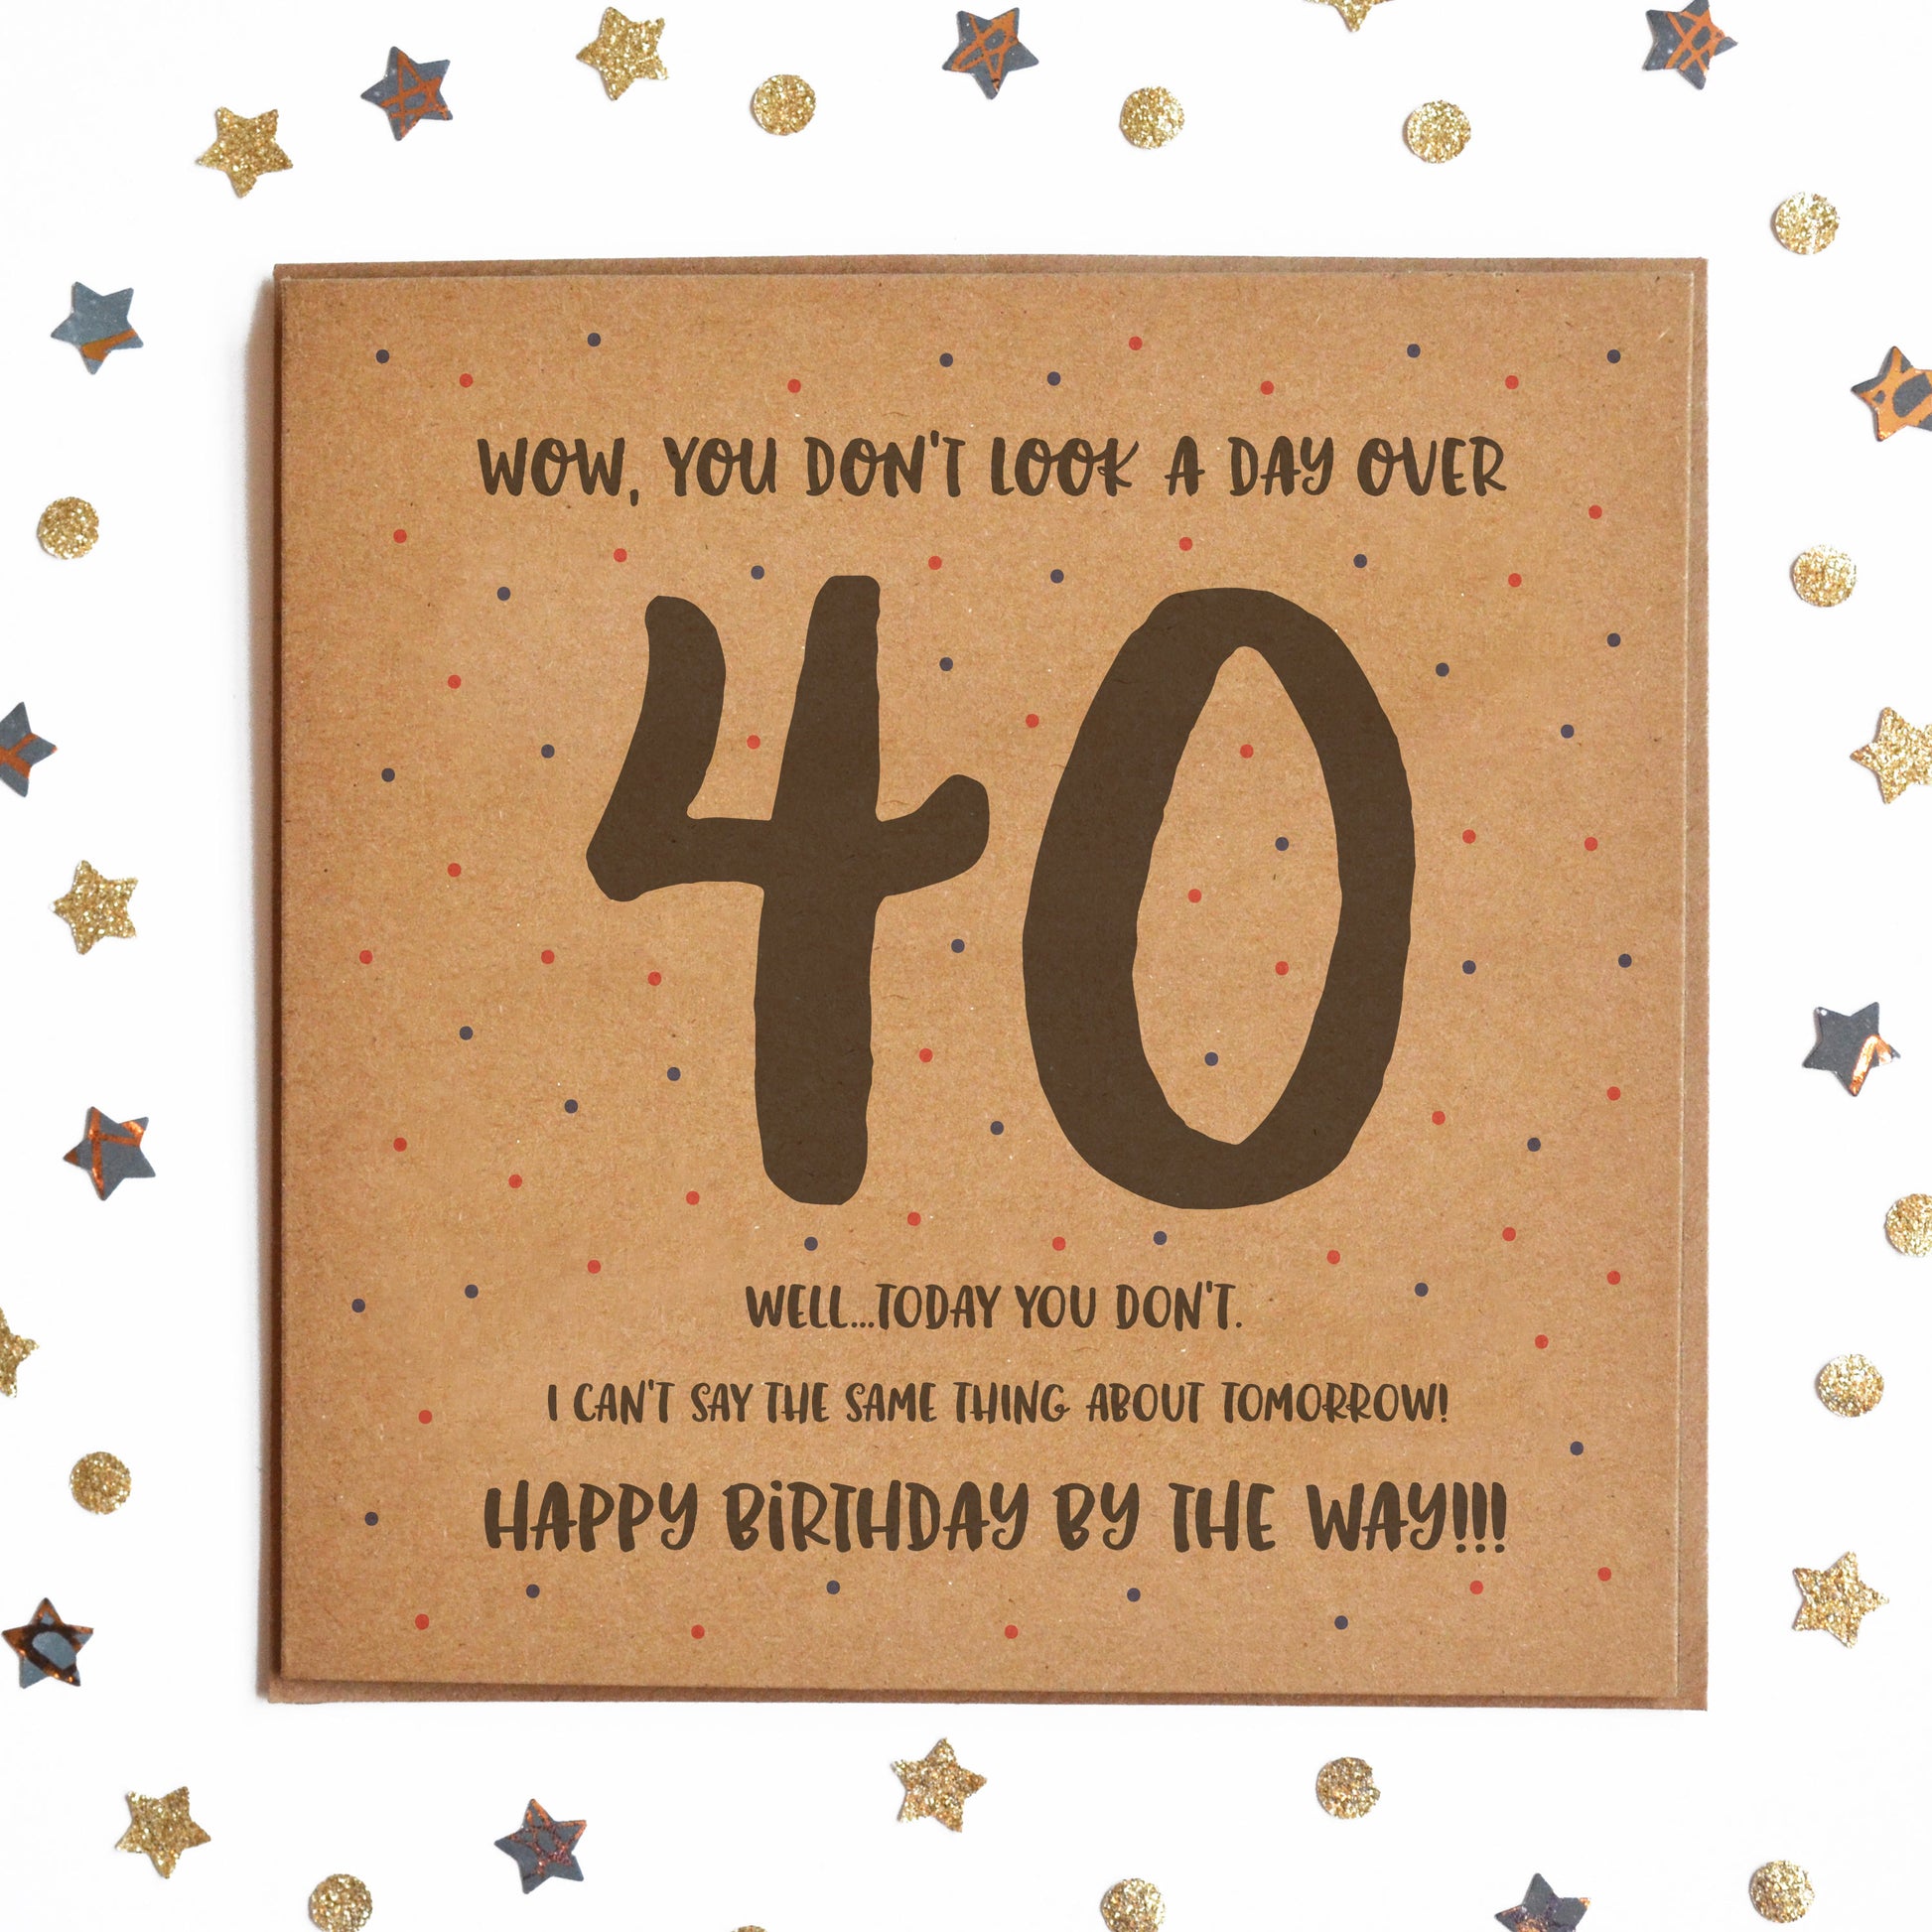 Funny Milestone Birthday Card with the message "WOW, YOU DON'T LOOK A DAY OVER 40! WELL TODAY YOU DON'T! I CAN'T SAY THE SAME THING ABOUT TOMORROW! HAPPY BIRTHDAY BY THE WAY!"